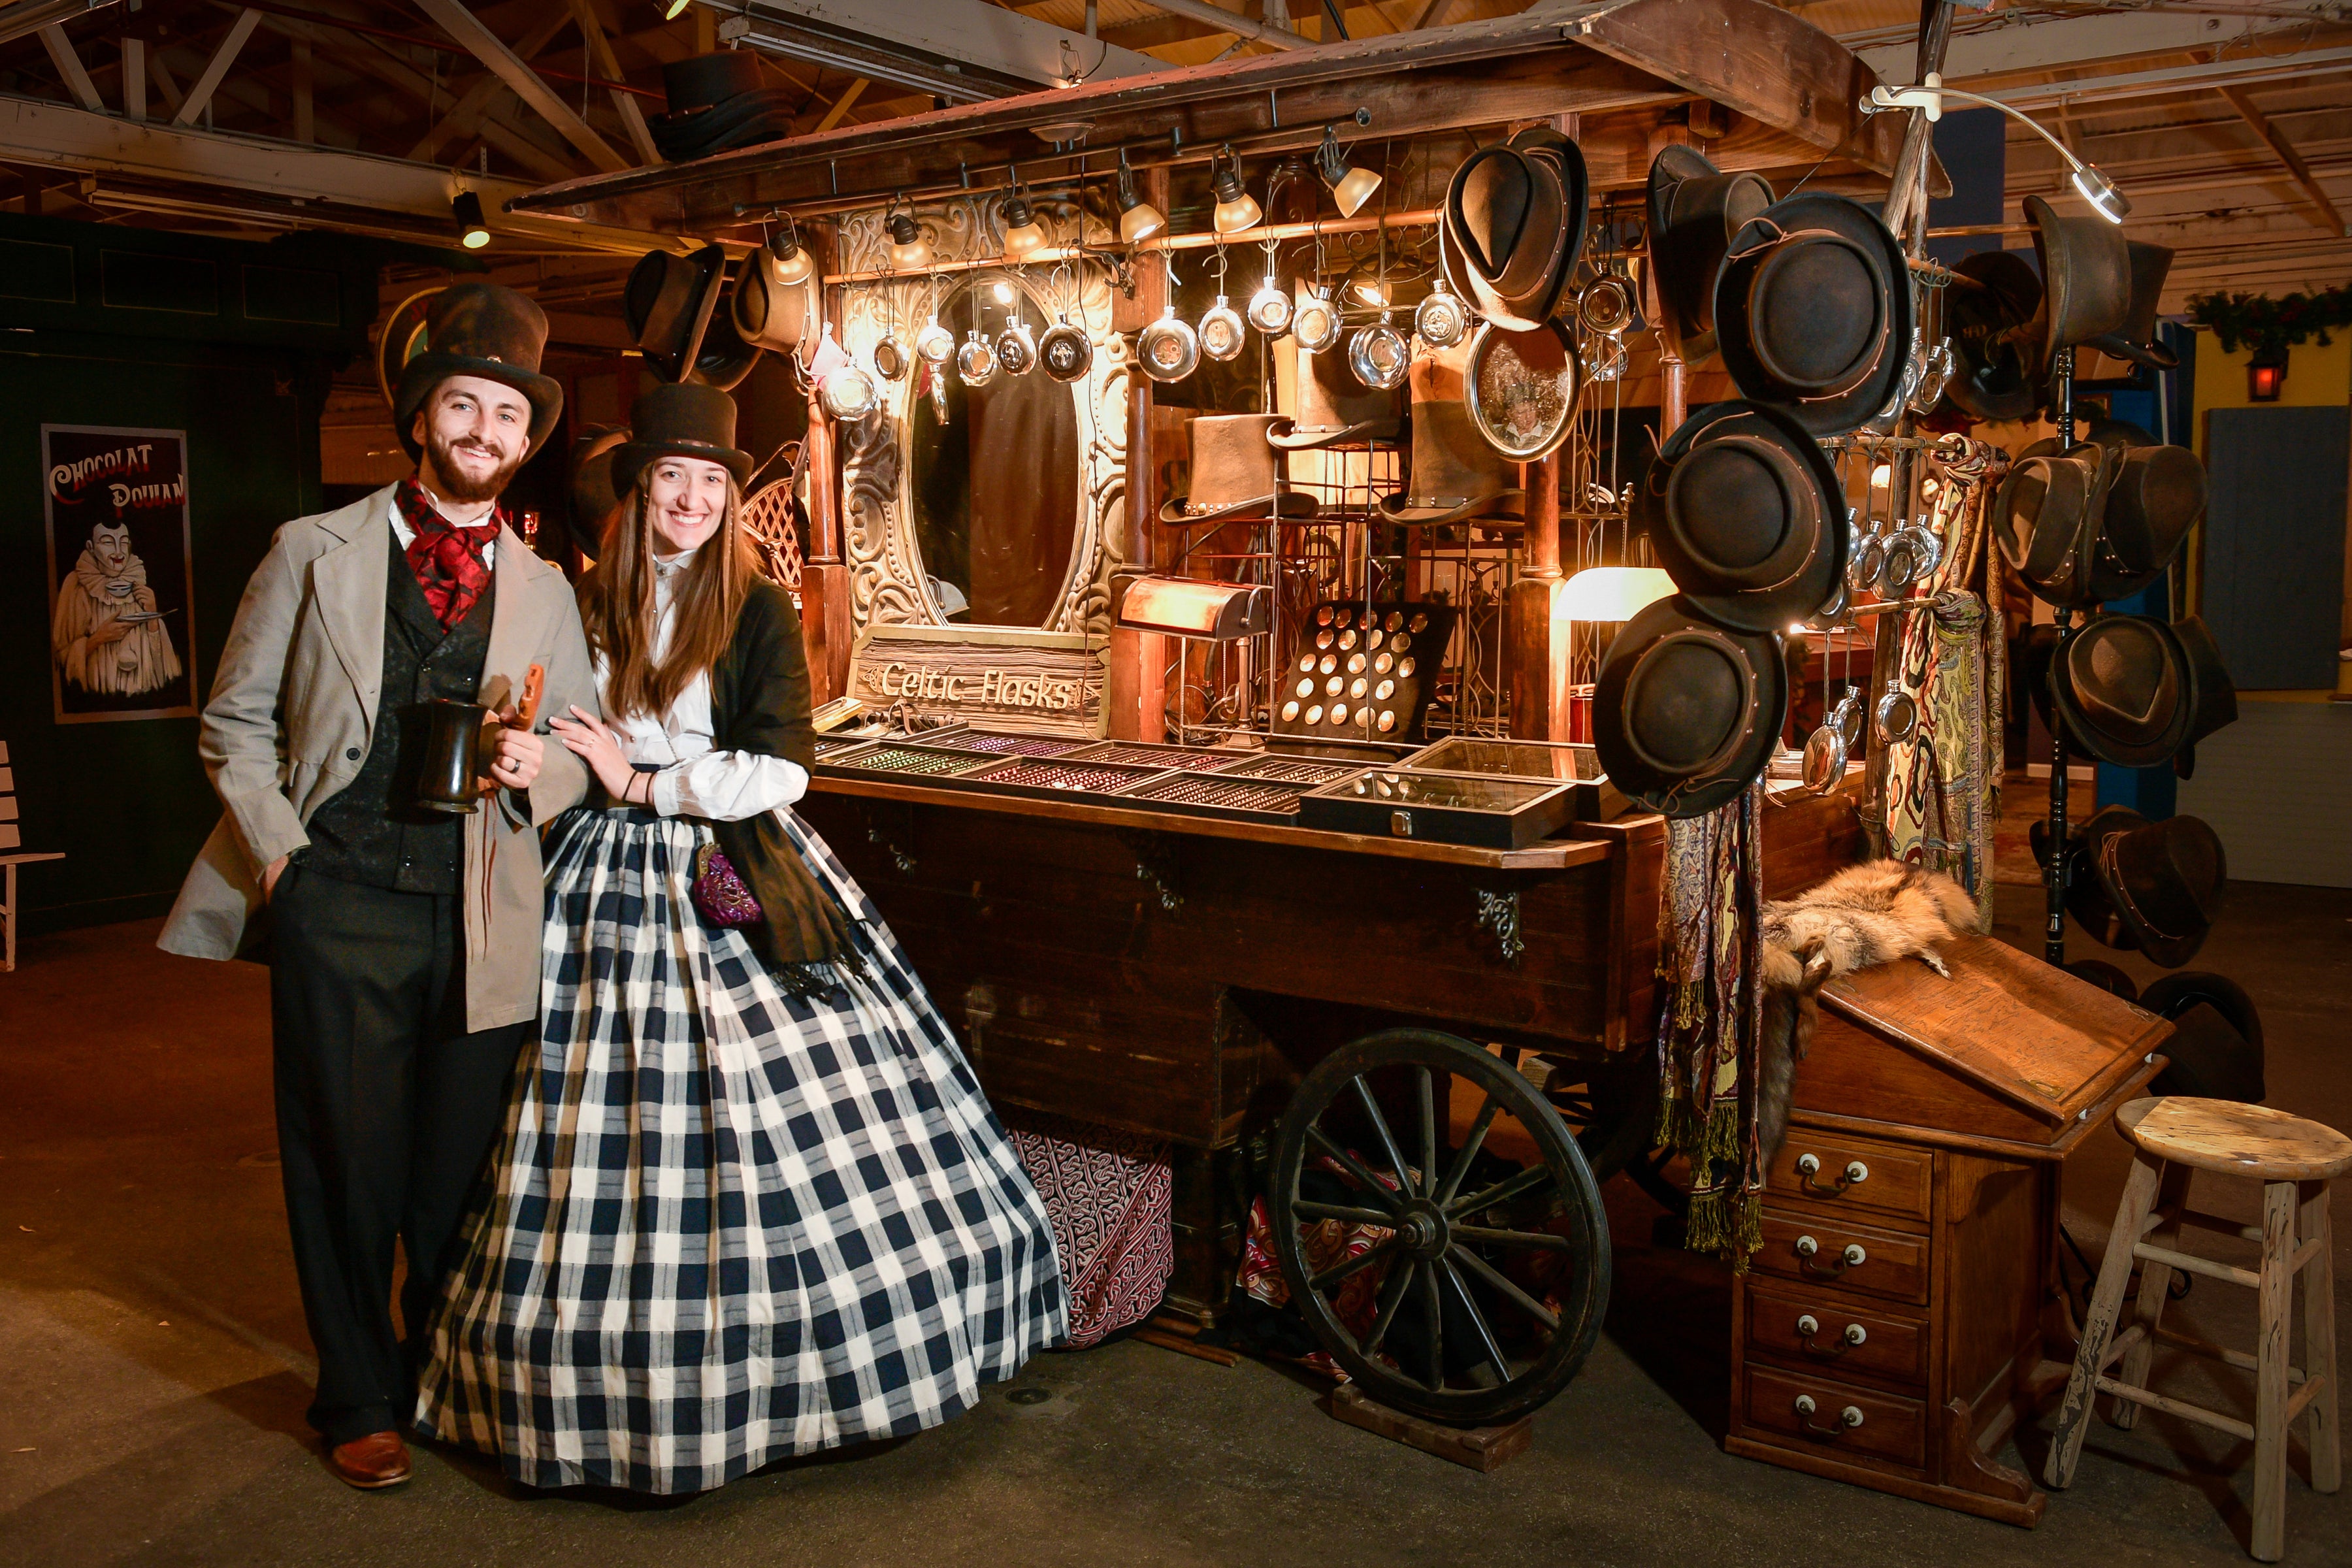 Travel across the Atlantic (and back in time) at this quirky Californian Christmas market